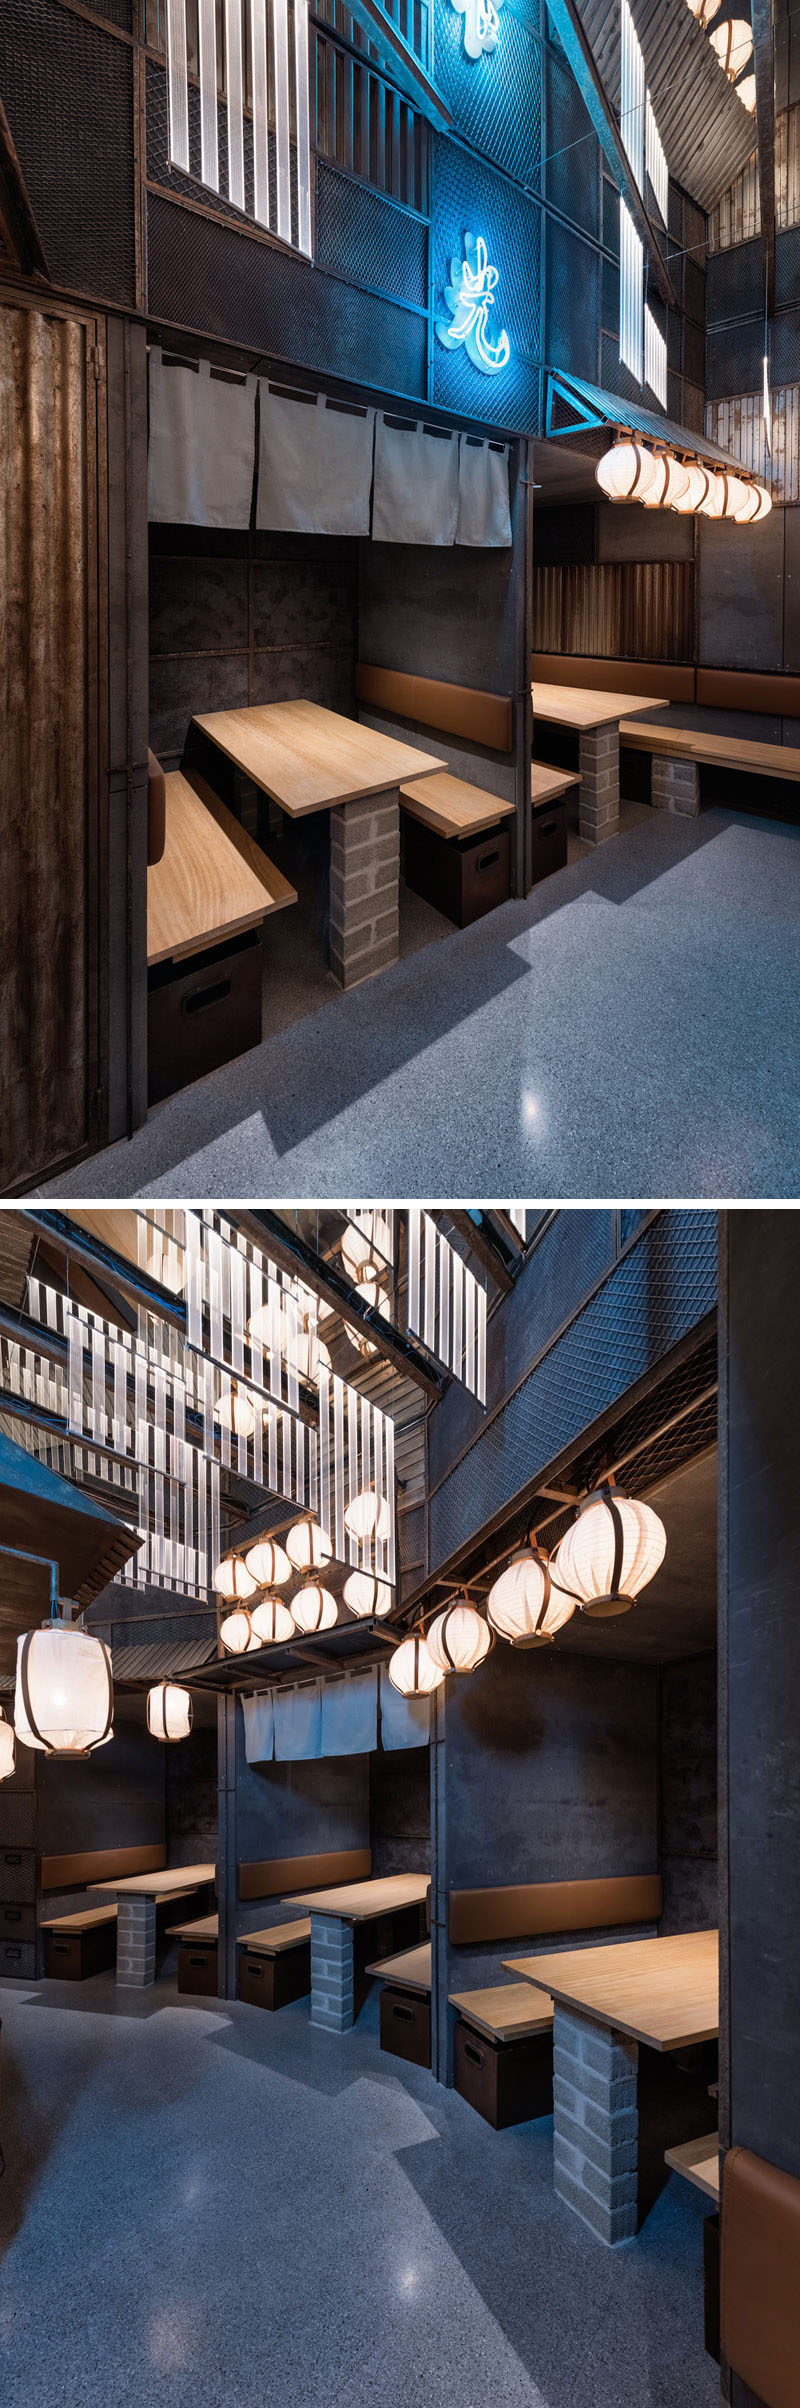 Industrial Interior Design - This Restaurant and bar goes for a